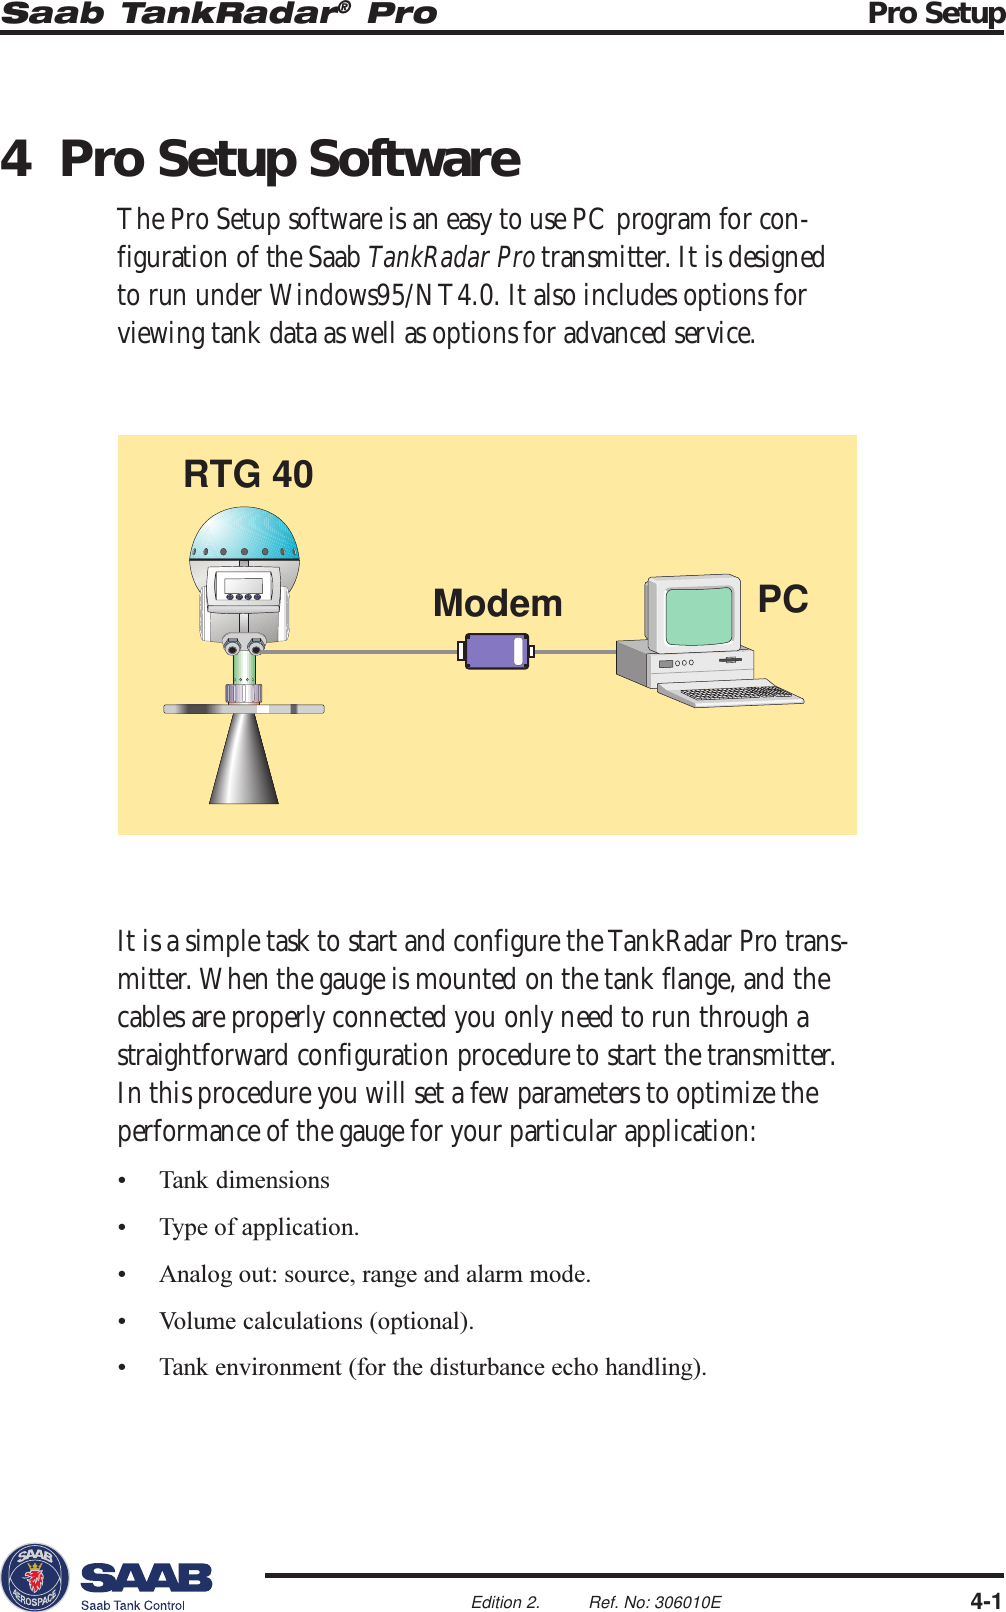 Saab TankRadar® Pro Pro Setup4-1Edition 2. Ref. No: 306010E4 Pro Setup SoftwareThe Pro Setup software is an easy to use PC program for con-figuration of the Saab TankRadar Pro transmitter. It is designedto run under Windows95/NT4.0. It also includes options forviewing tank data as well as options for advanced service.It is a simple task to start and configure the TankRadar Pro trans-mitter. When the gauge is mounted on the tank flange, and thecables are properly connected you only need to run through astraightforward configuration procedure to start the transmitter.In this procedure you will set a few parameters to optimize theperformance of the gauge for your particular application: Tank dimensions Type of application. Analog out: source, range and alarm mode. Volume calculations (optional). Tank environment (for the disturbance echo handling).PCModemRTG 40